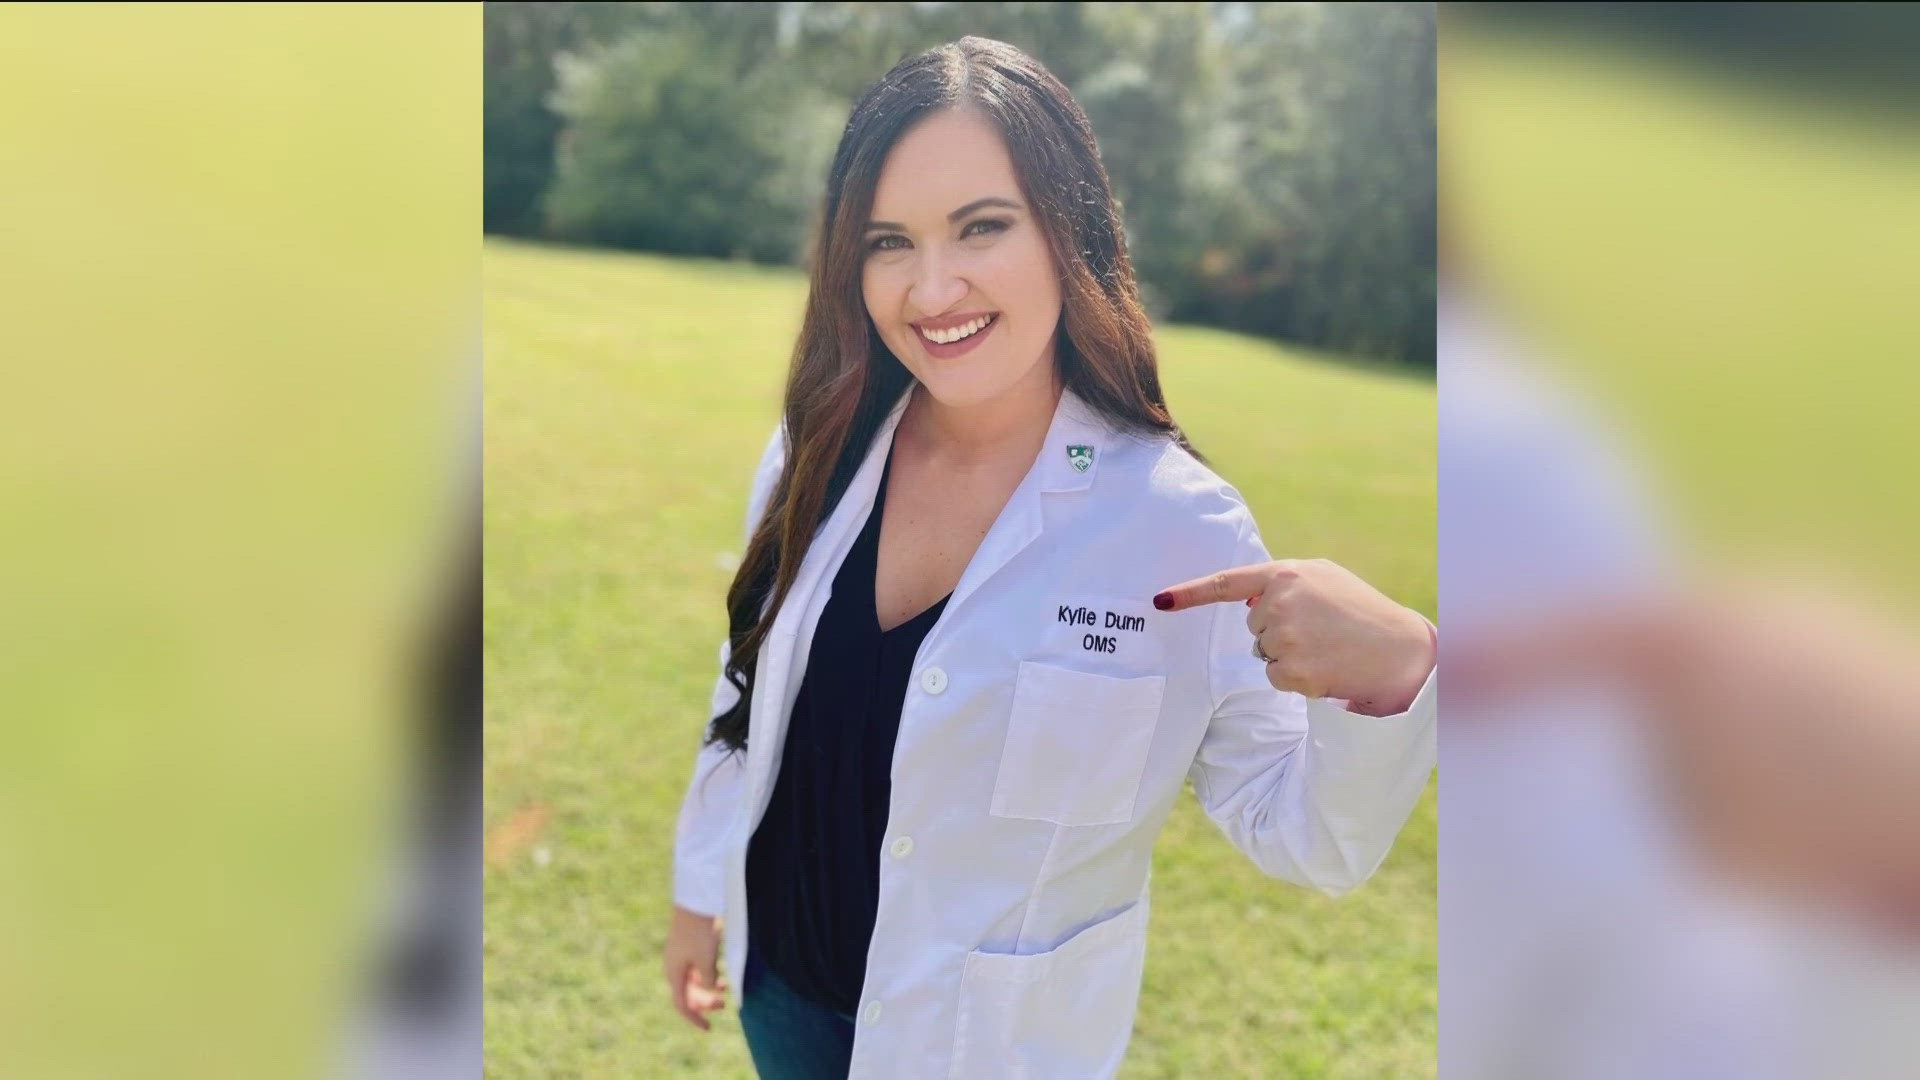 Dunn, who graduated with her doctorate from the Arkansas College of Osteopathic Medicine on May 18, says her school supplied her with the confidence to act.